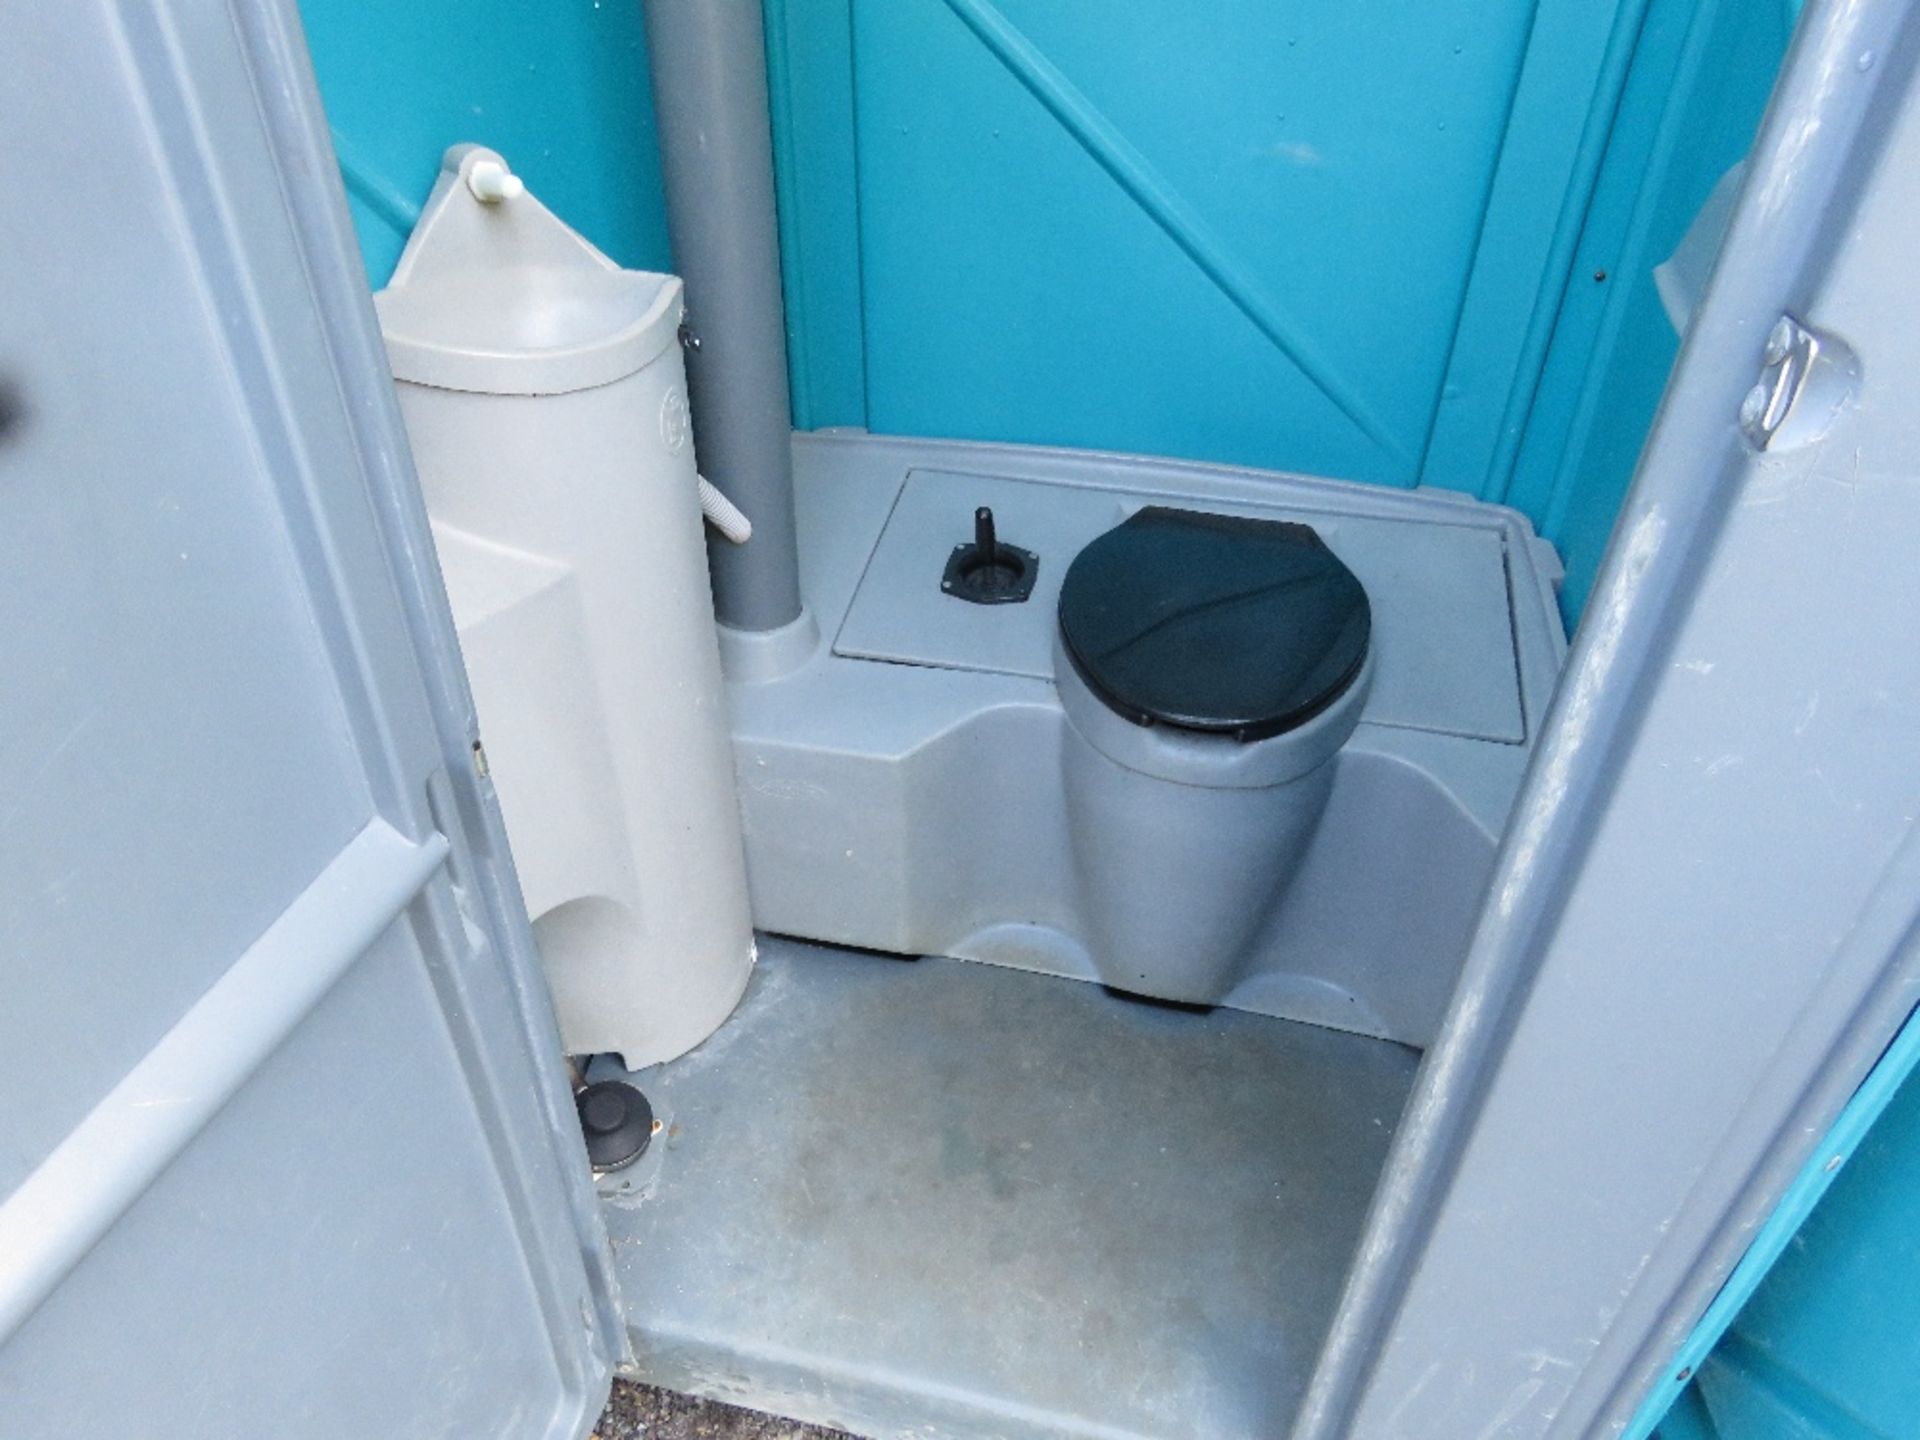 PORTABLE SITE TOILET WITH WASHBASIN. CLEANED AND BLUE DETERGENT ADDED READY FOR USE. THIS LOT IS - Image 2 of 3